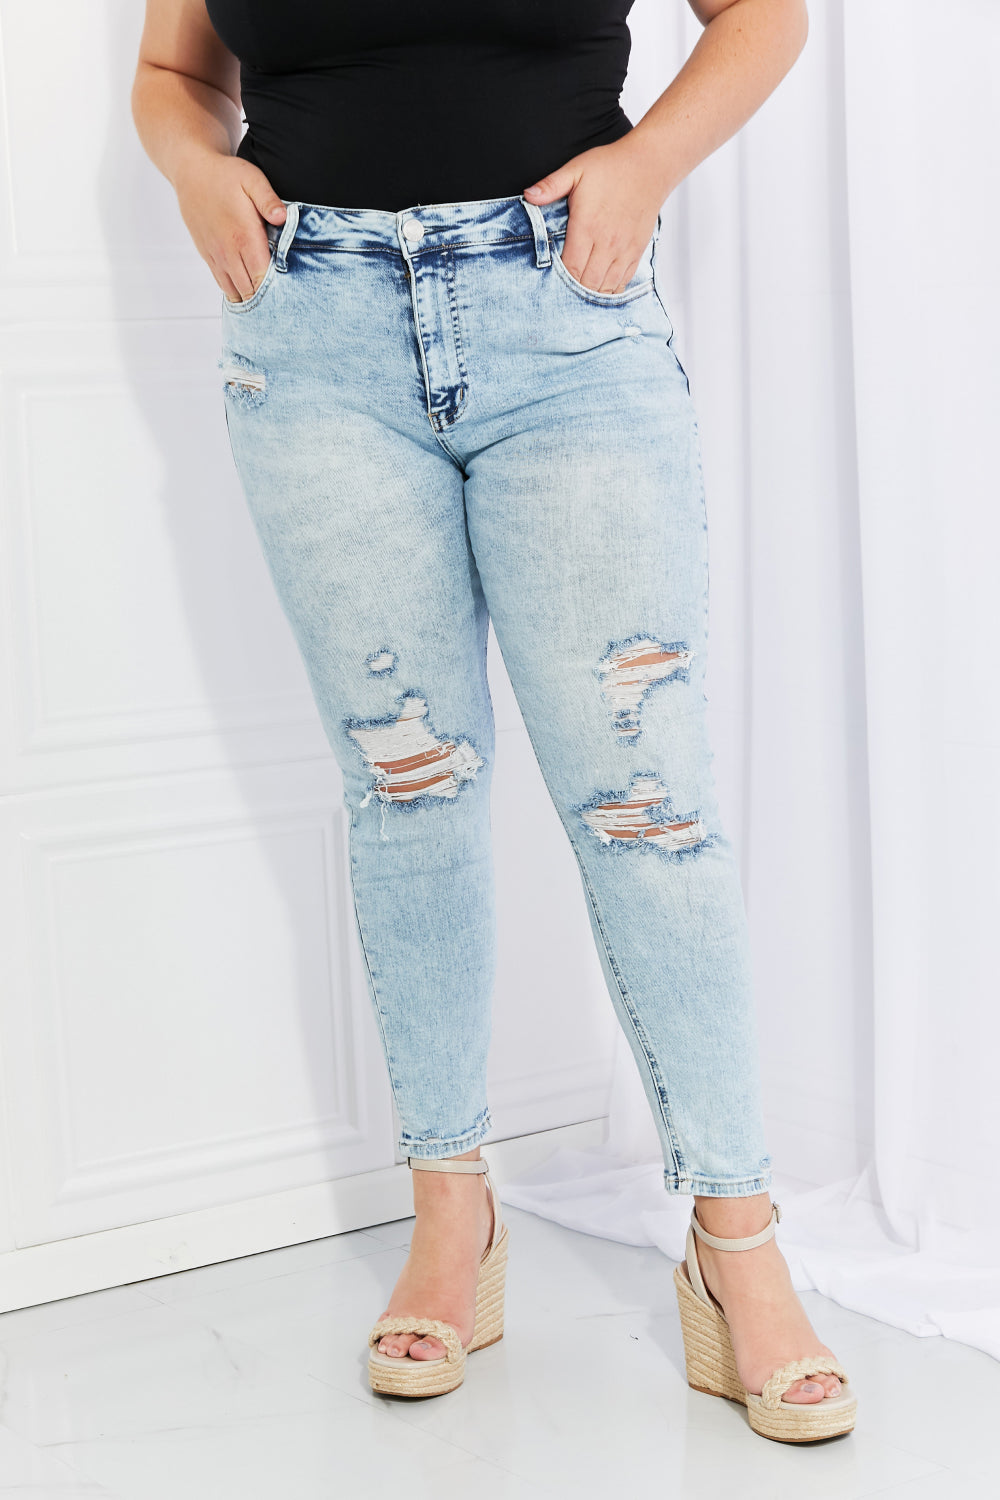 VERVET On The Road Full Size Distressed Jeans